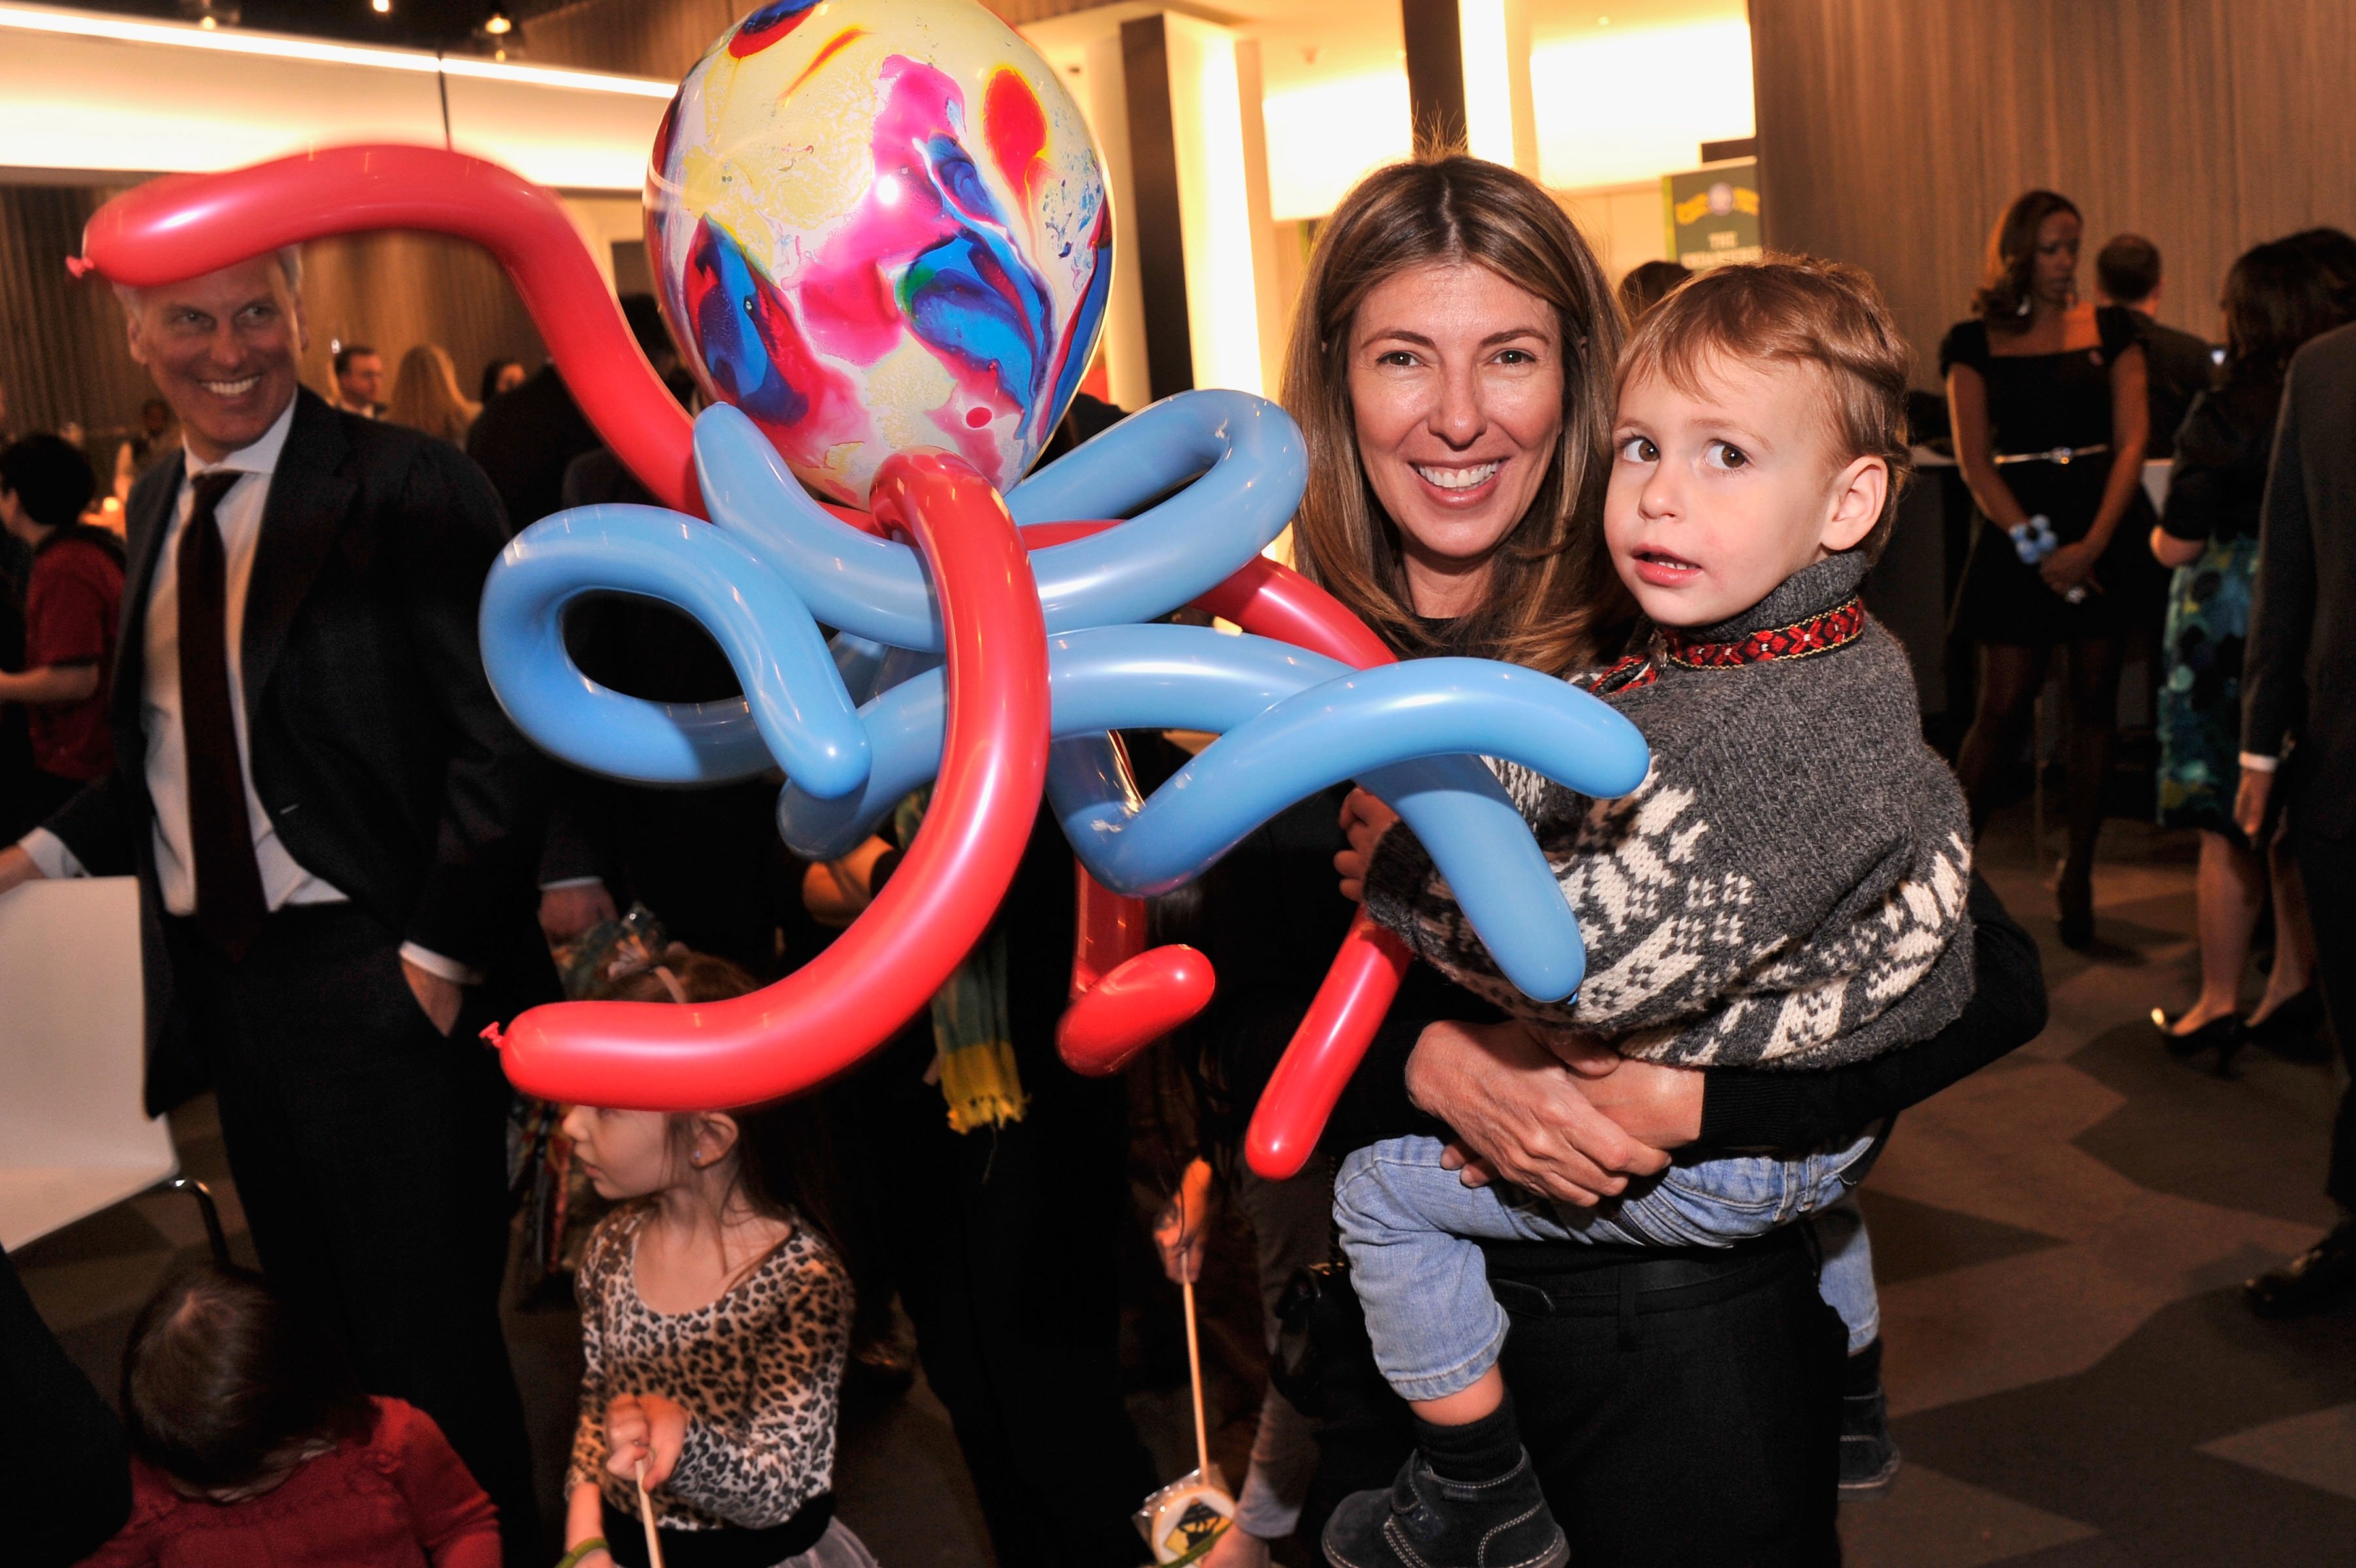 Nina Garcia and Alexander David Conrod attend Ringling Bros. And Barnum & Bailey Present Built To Amaze! on March 21, 2013, in New York City. | Source: Getty Images.